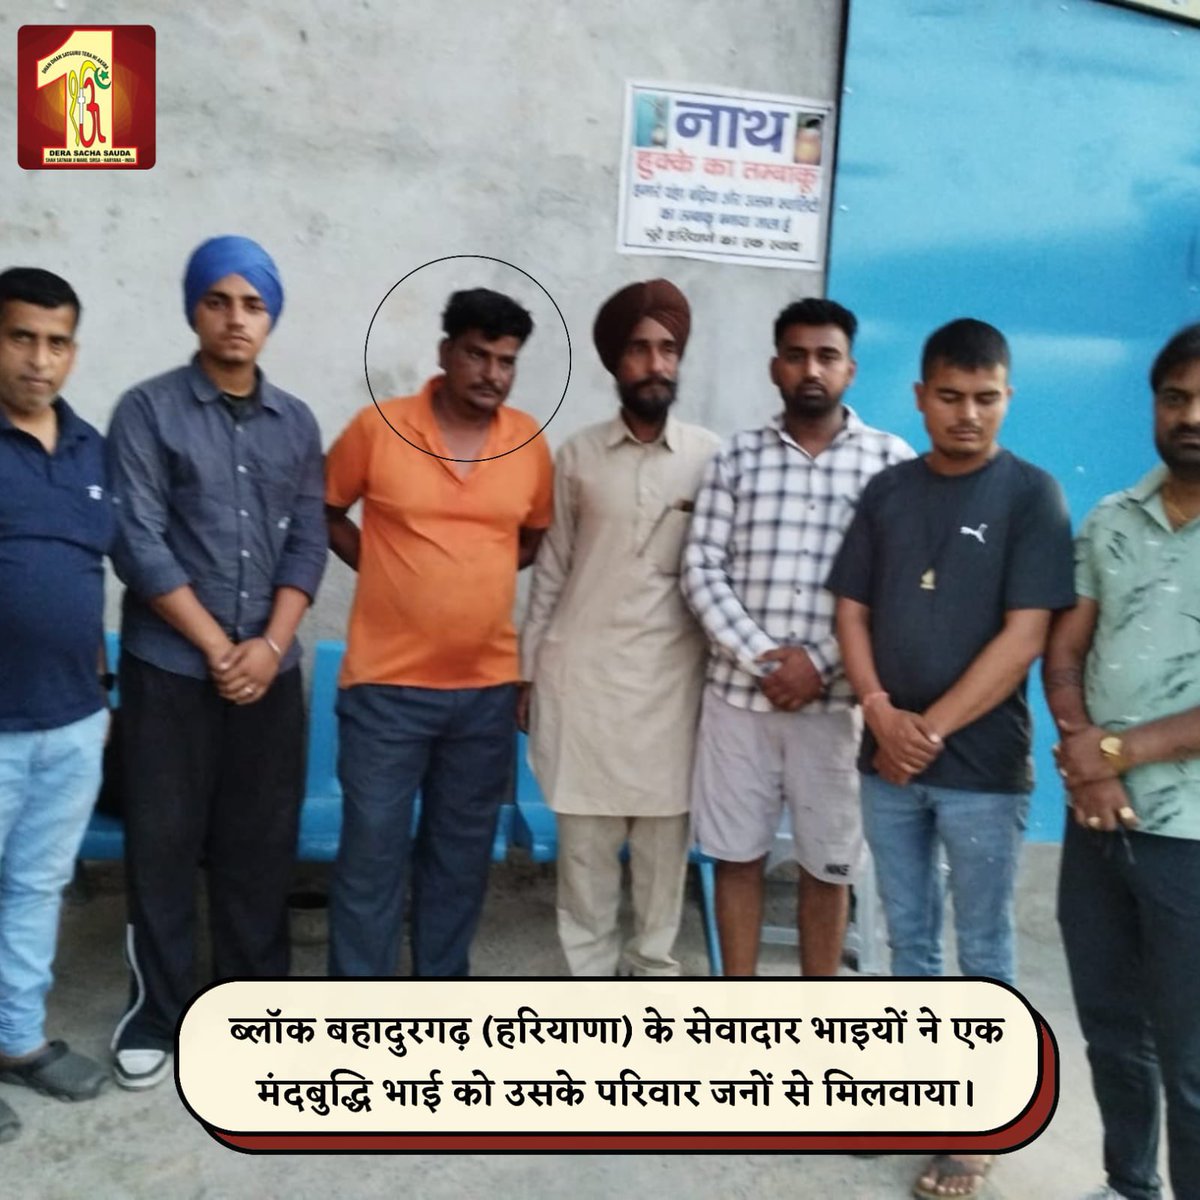 Dera Sacha Sauda volunteers demonstrate unwavering compassion, extending care and medical assistance to a mentally challenged individual. Their dedication shines as they go the extra mile, reuniting him with his family, embodying the spirit of love and support.